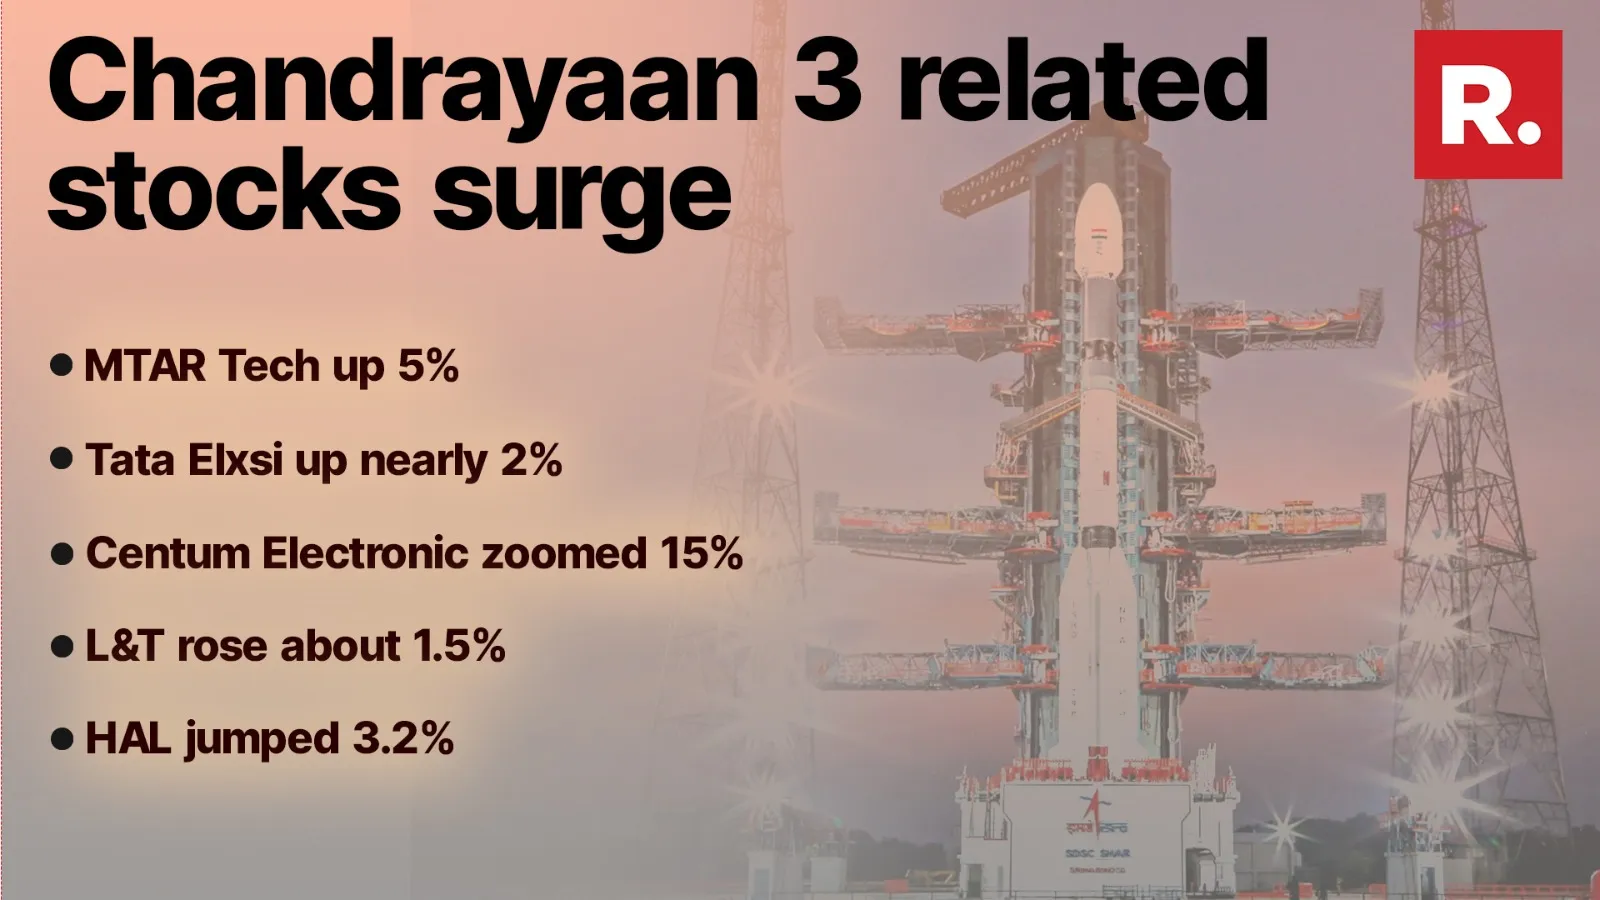 Companies Whose shares soared after chandrayaan-3's triumph